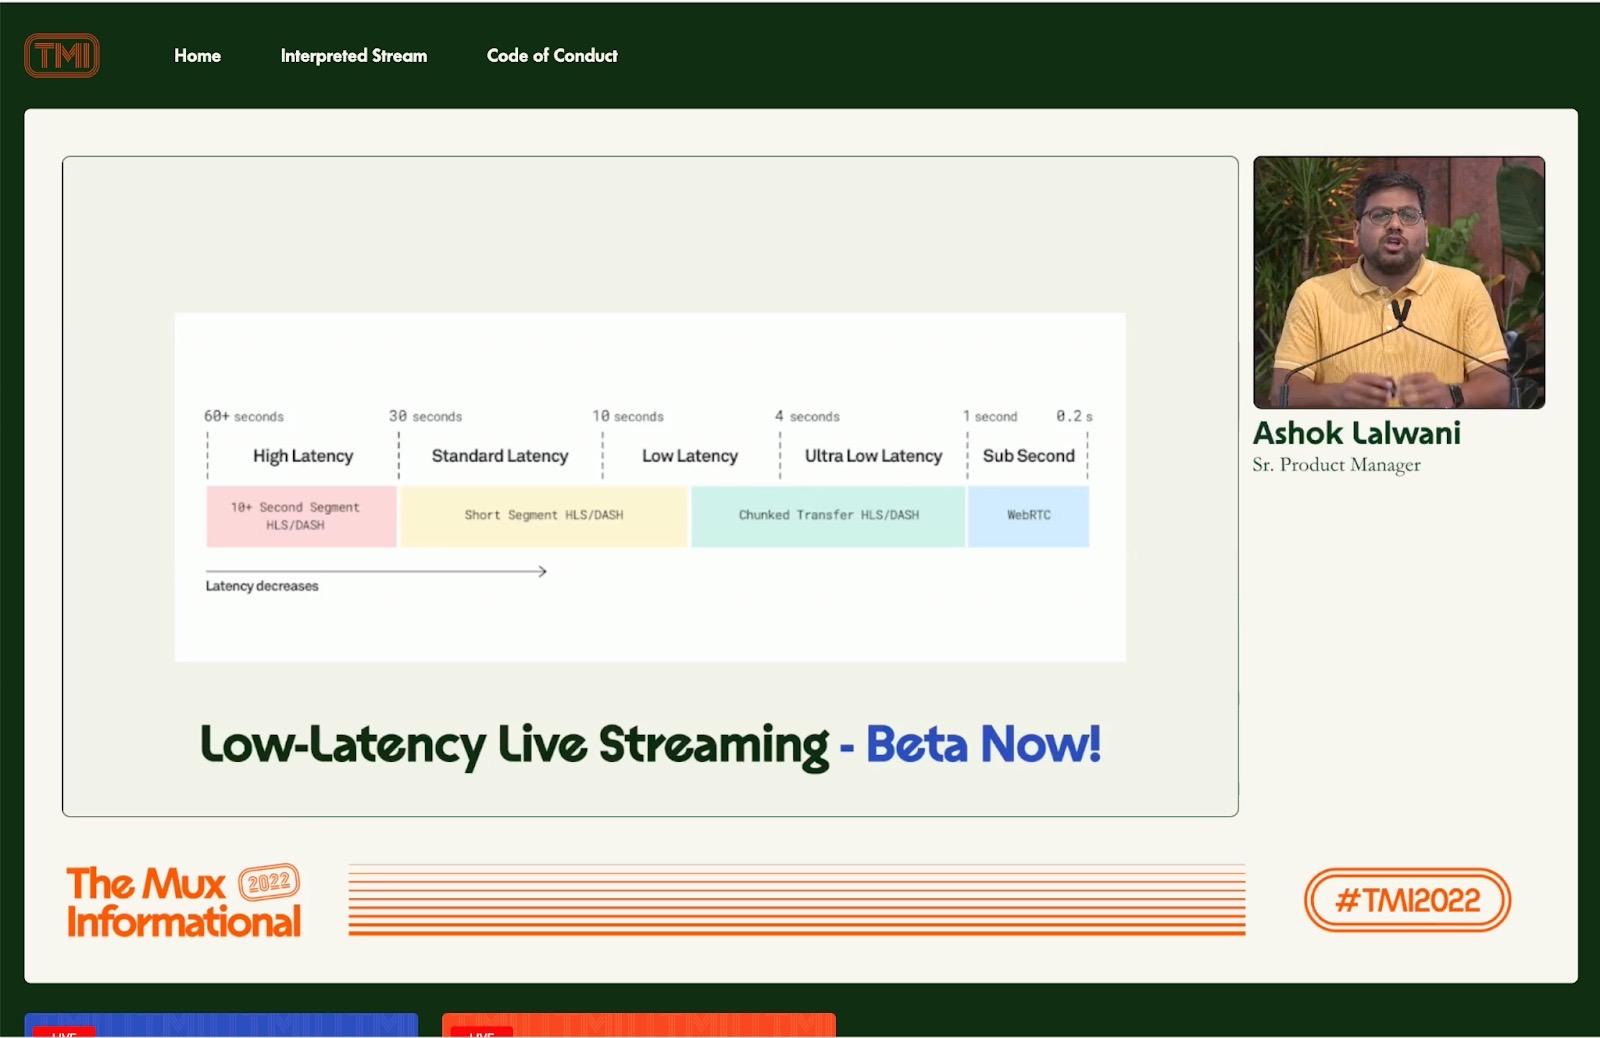 A screenshot of a livestream which depicts a presentation slide on 80% of the screen starting from the left-hand side. The slide says, "Low-Latency Live Streaming - Beta Now!" below a diagram of different levels of latency. On the right-hand side, A man in a yellow shirt named, Ashok Lalwani, Sr. Product Manager is depicted on stage.